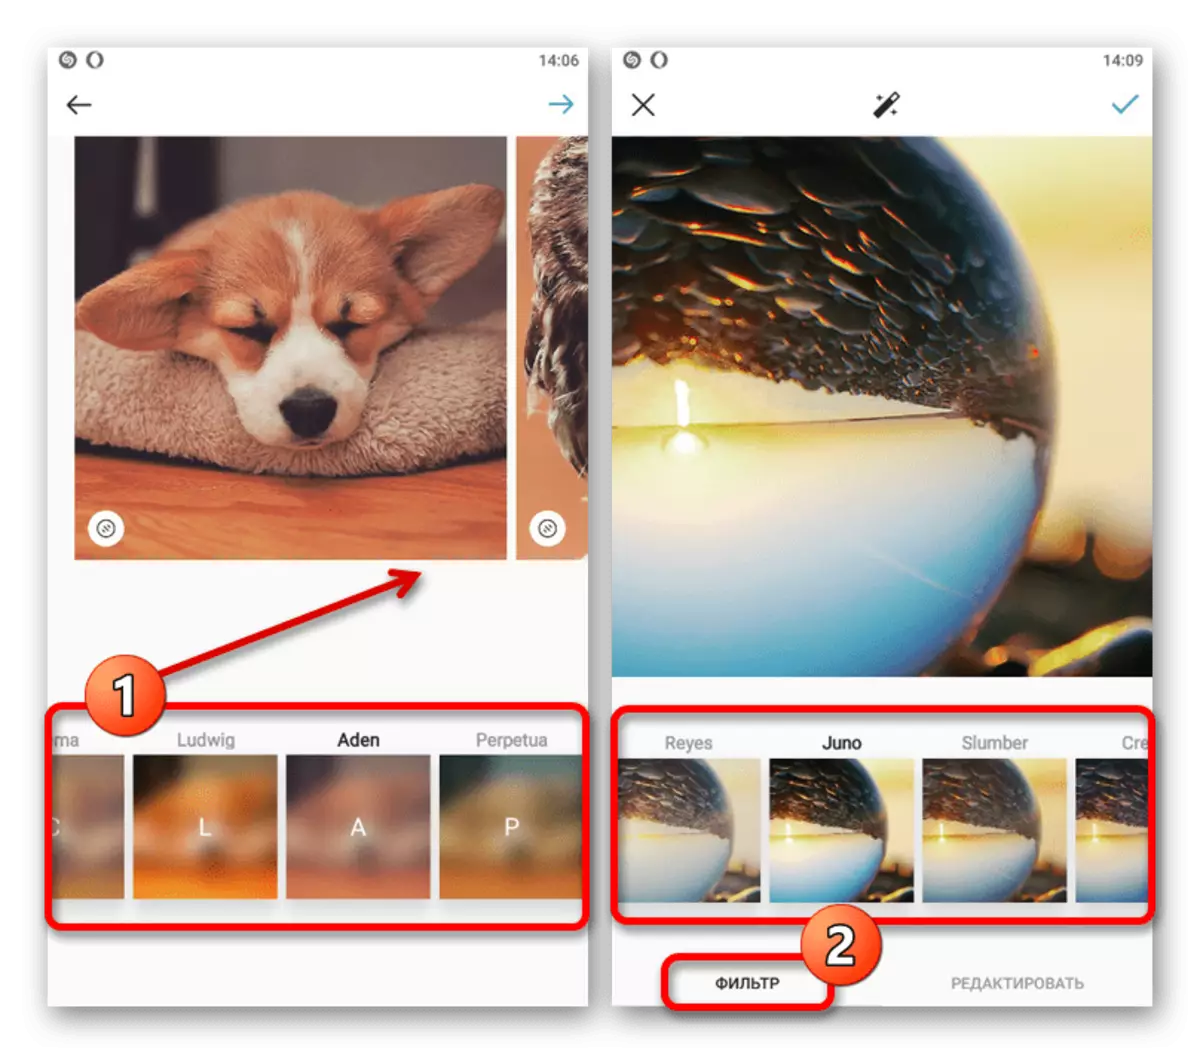 An example of applying filters to a file in the Instagram mobile application